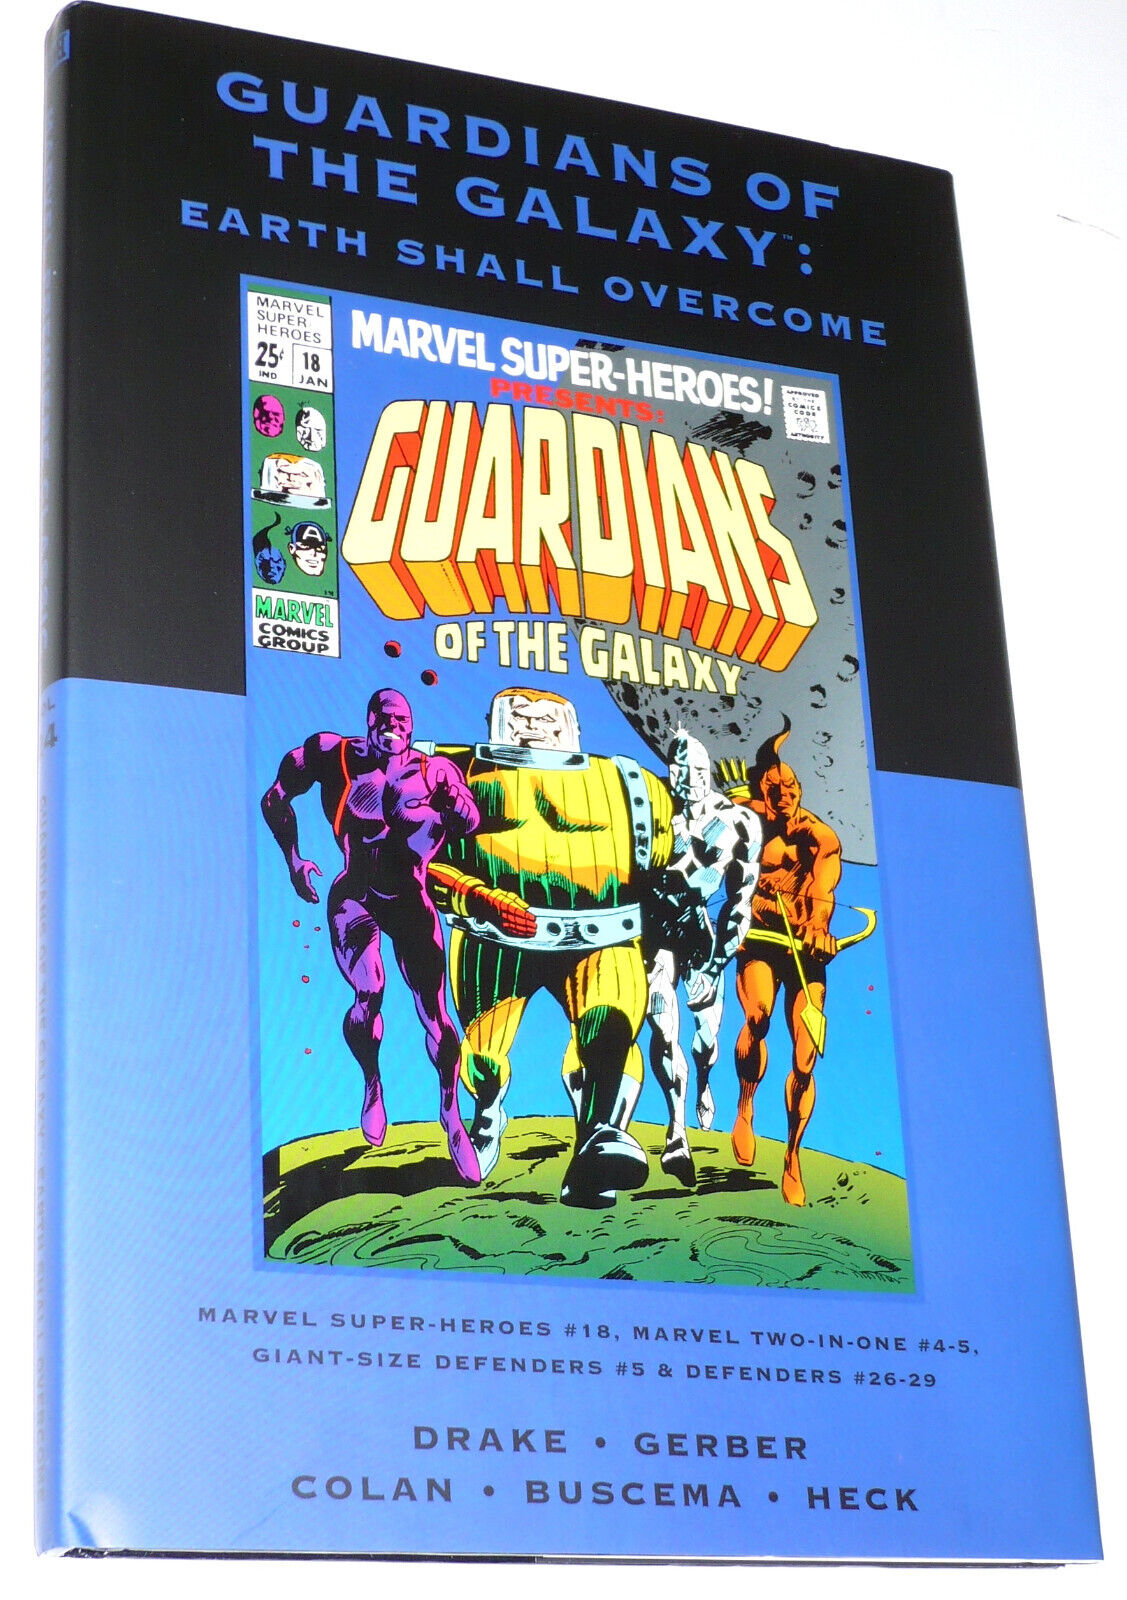 Guardians of the Galaxy Earth Shall Overcome HC, NEW, NM,Marvel Premire Classics